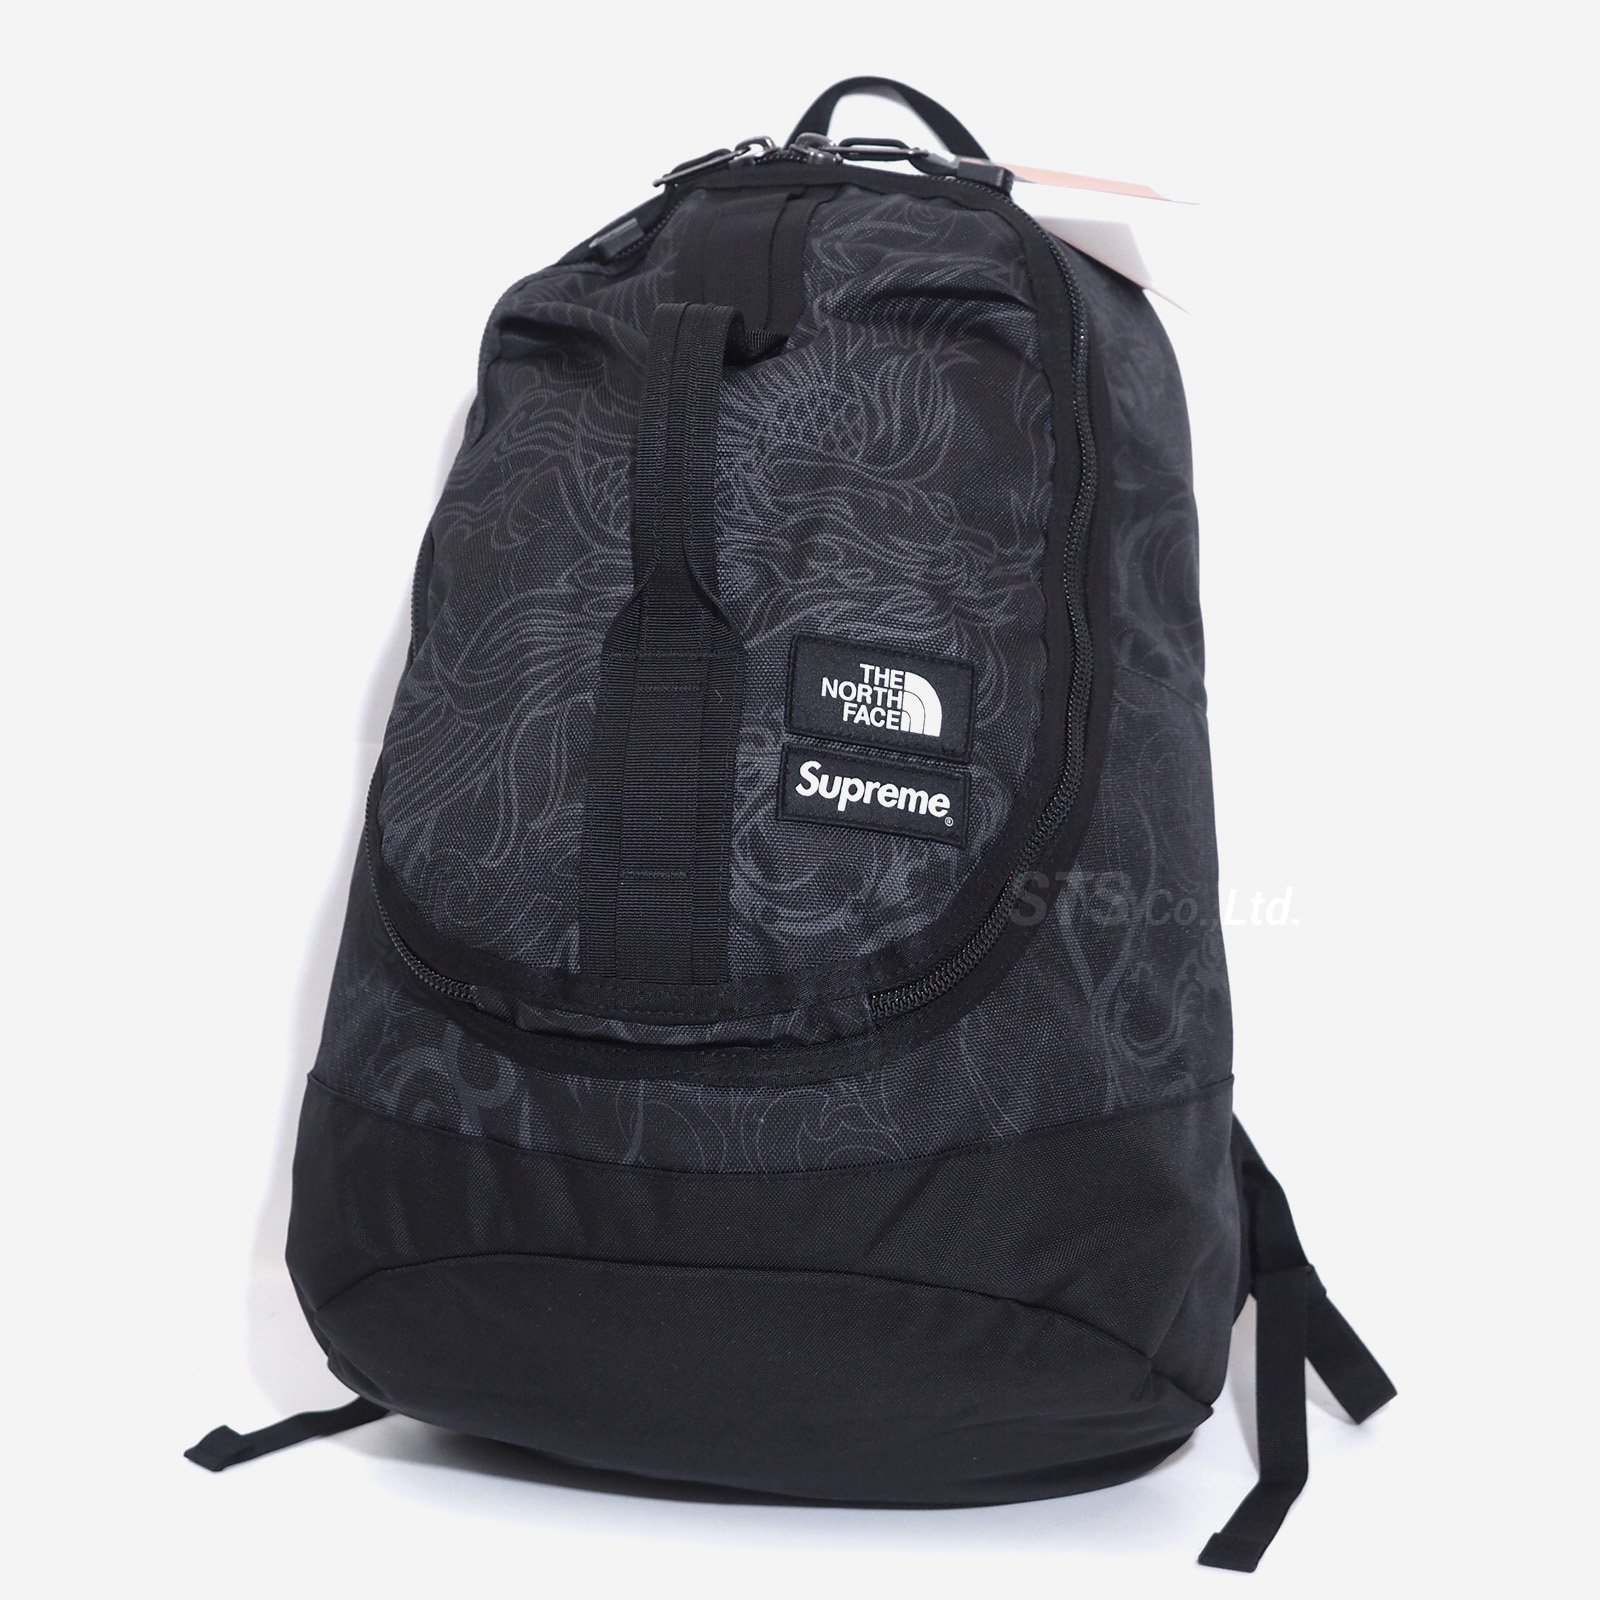 Supreme/The North Face Steep Tech Backpack - ParkSIDER